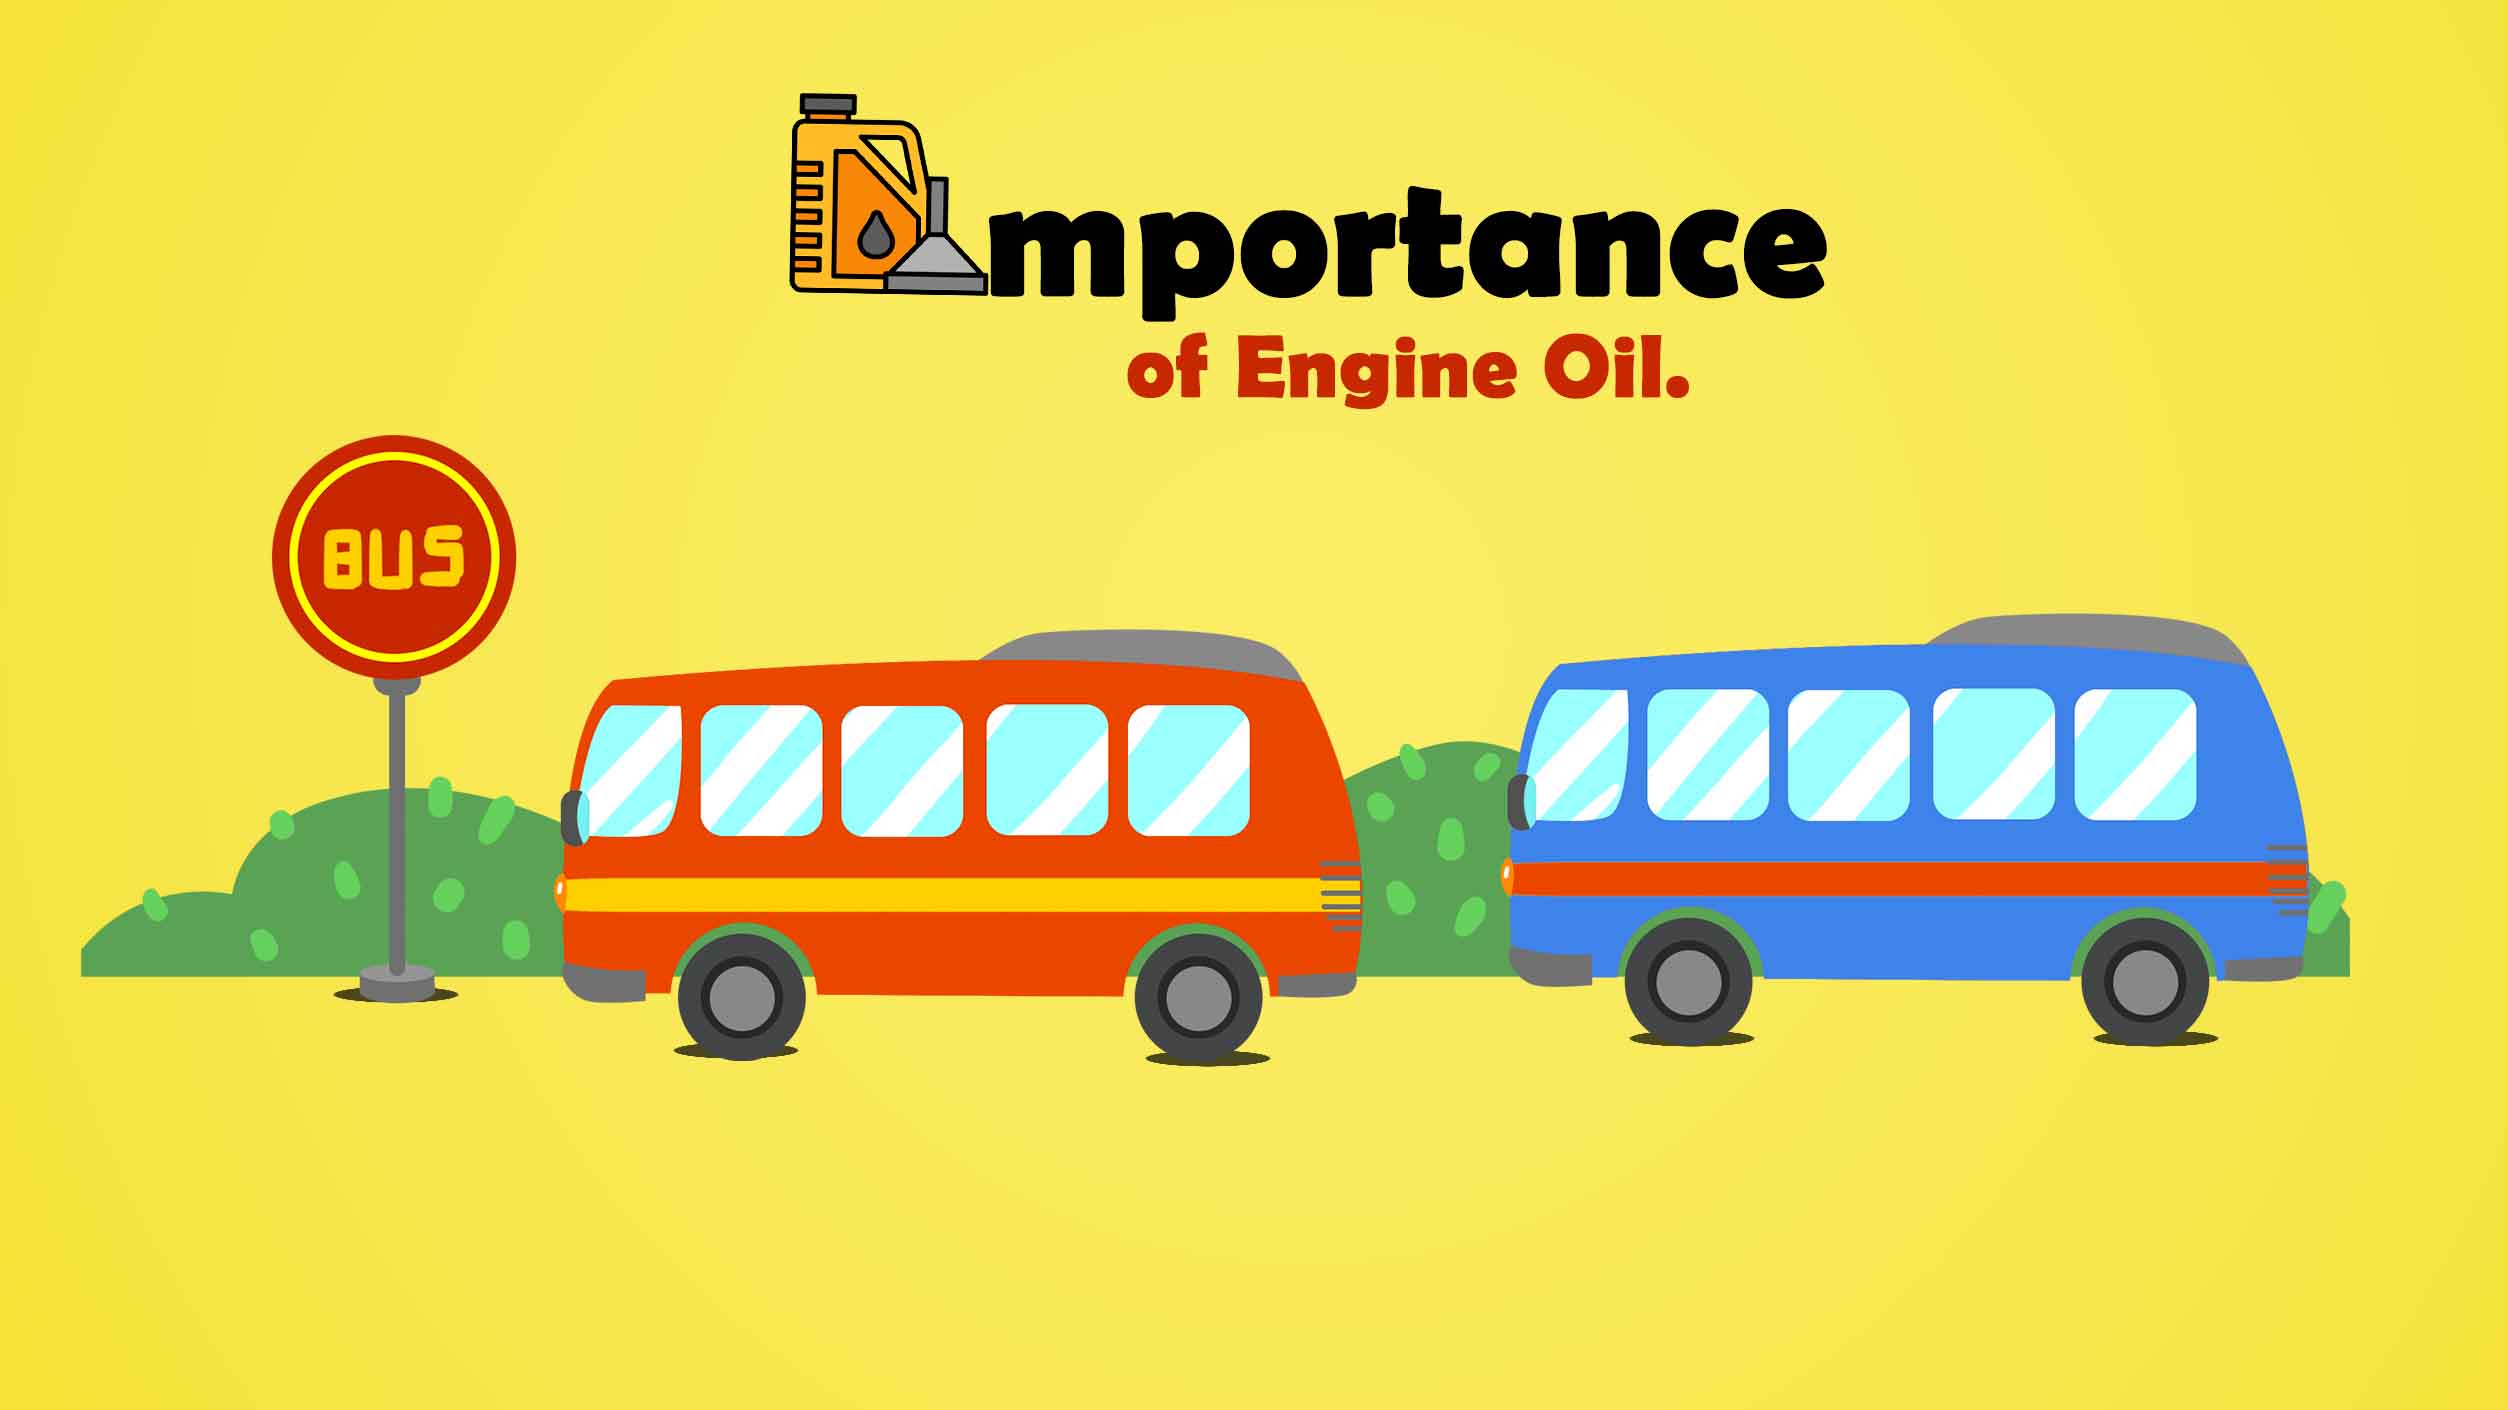 The Importance of Engine Oil: Enhancing Vehicle Performance and Longevity on Nigeria Roads.